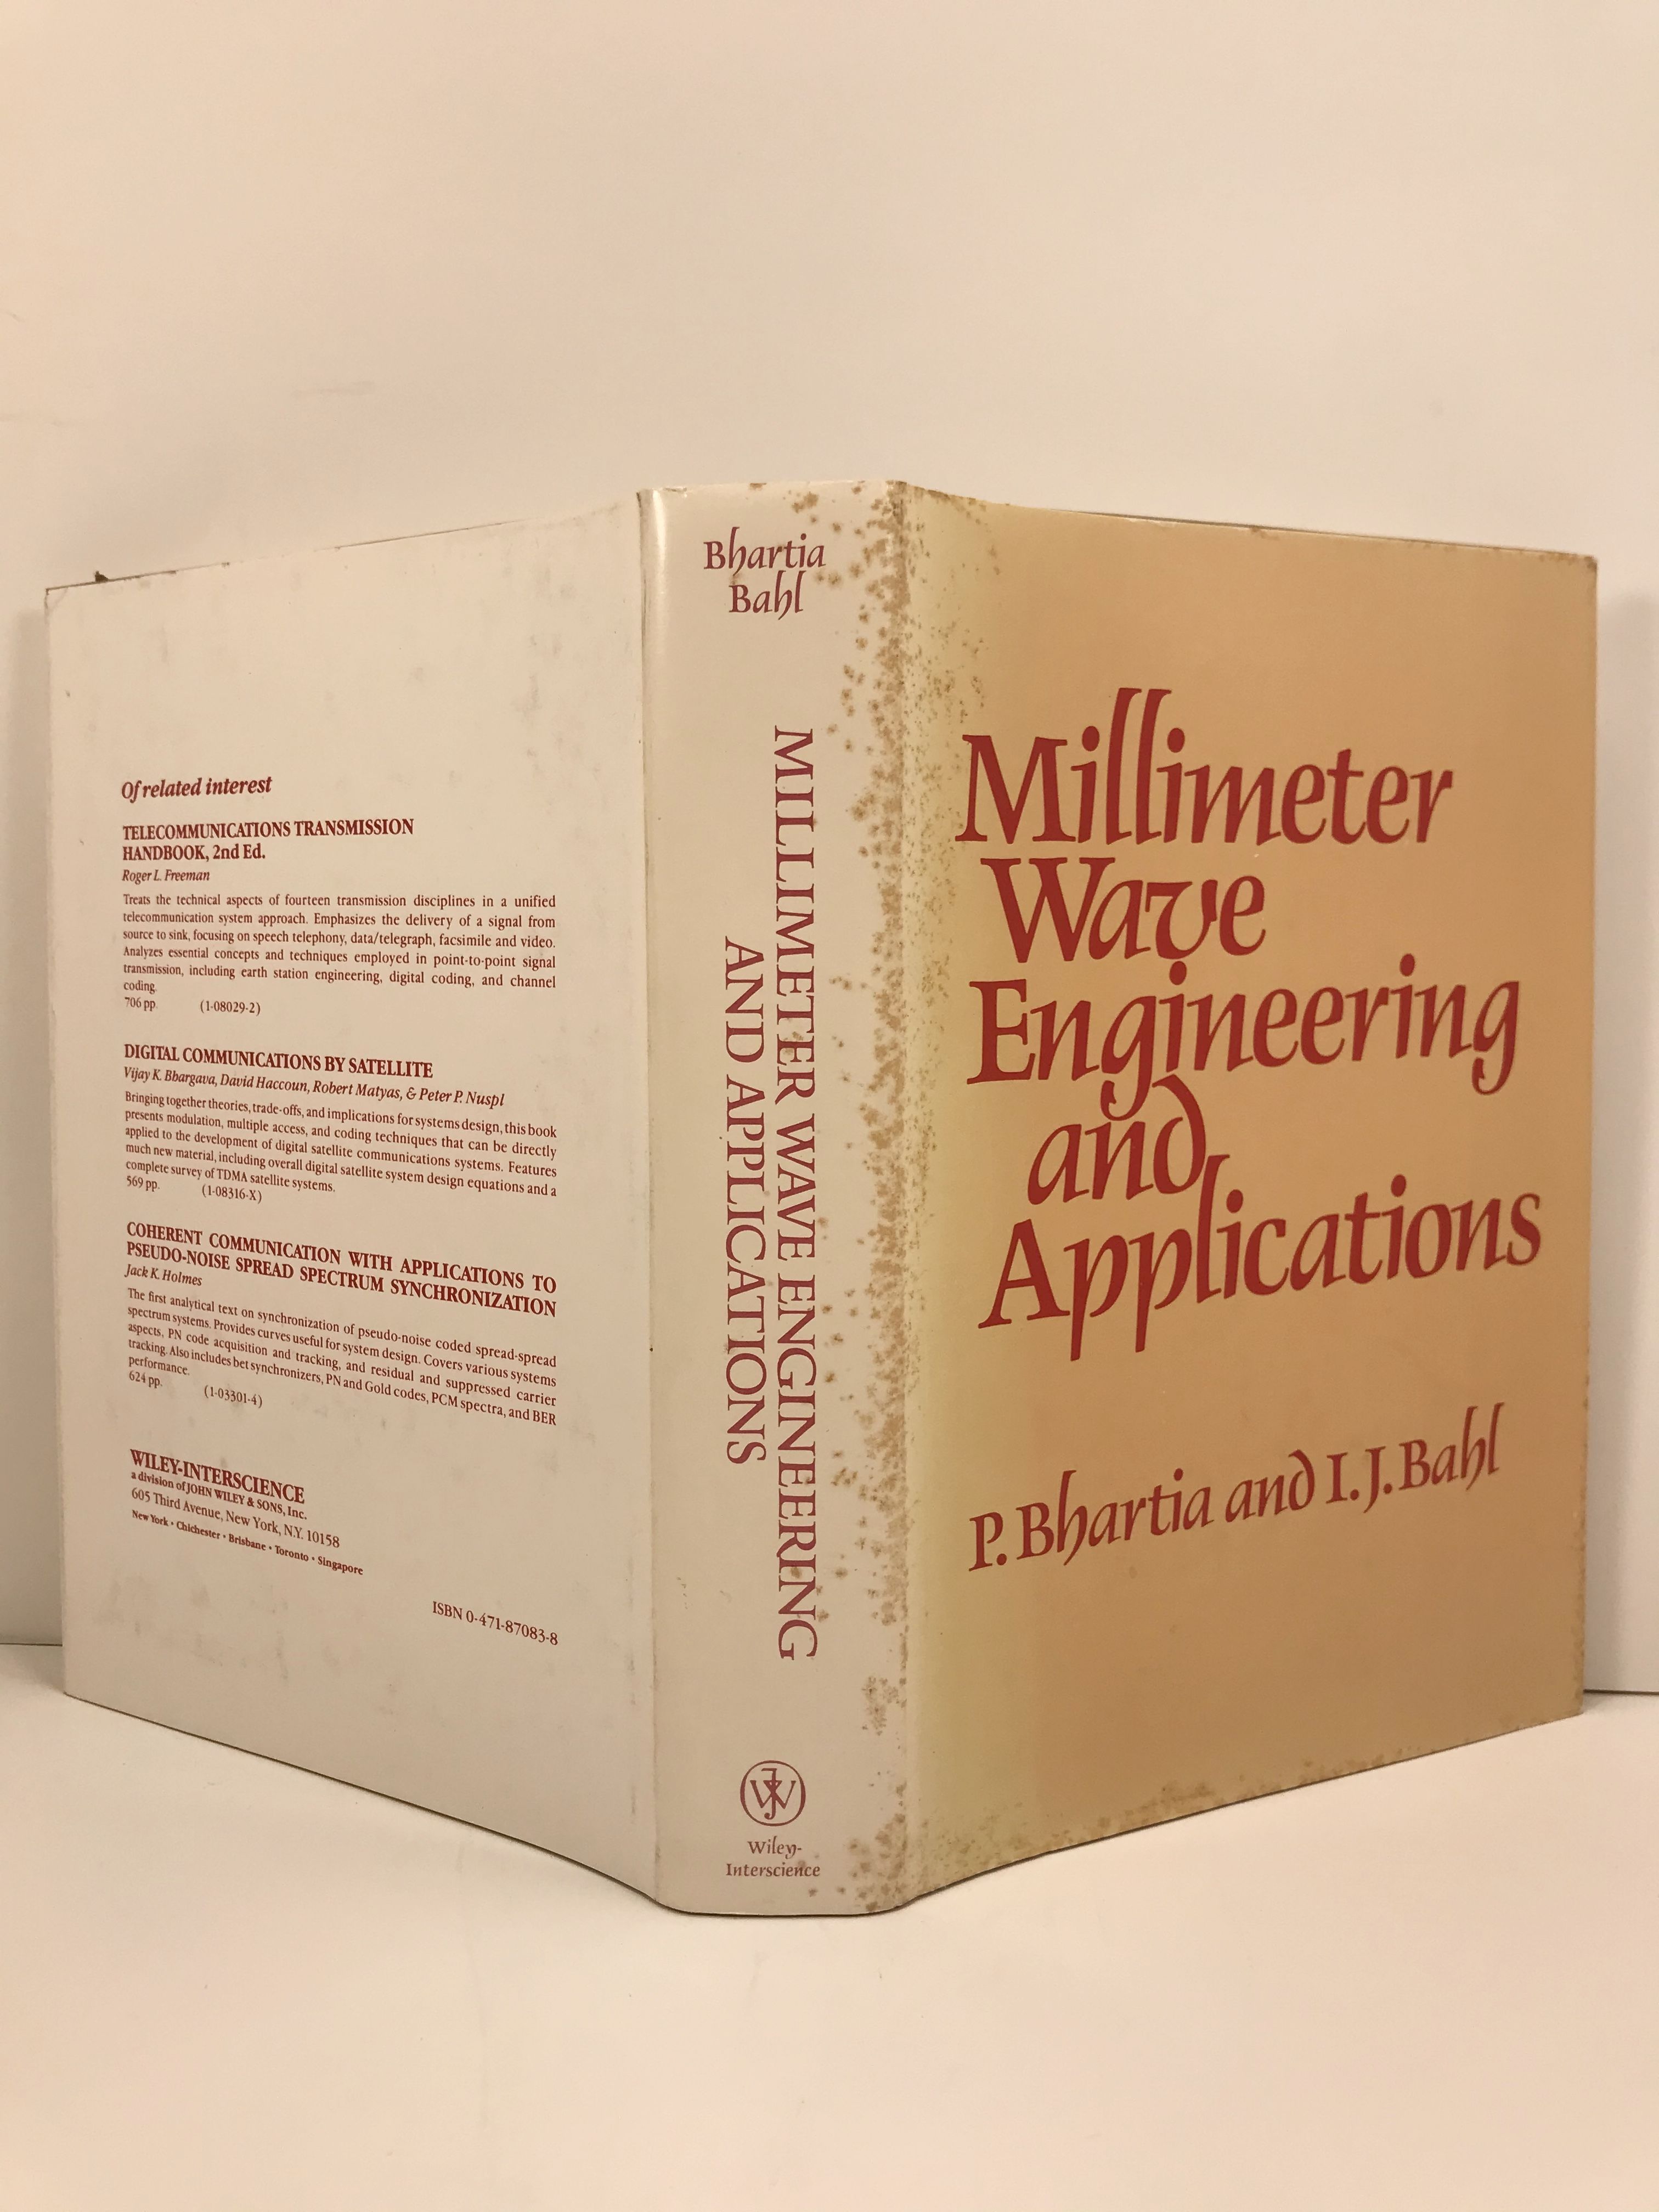 Millimeter Wave Engineering and Applications